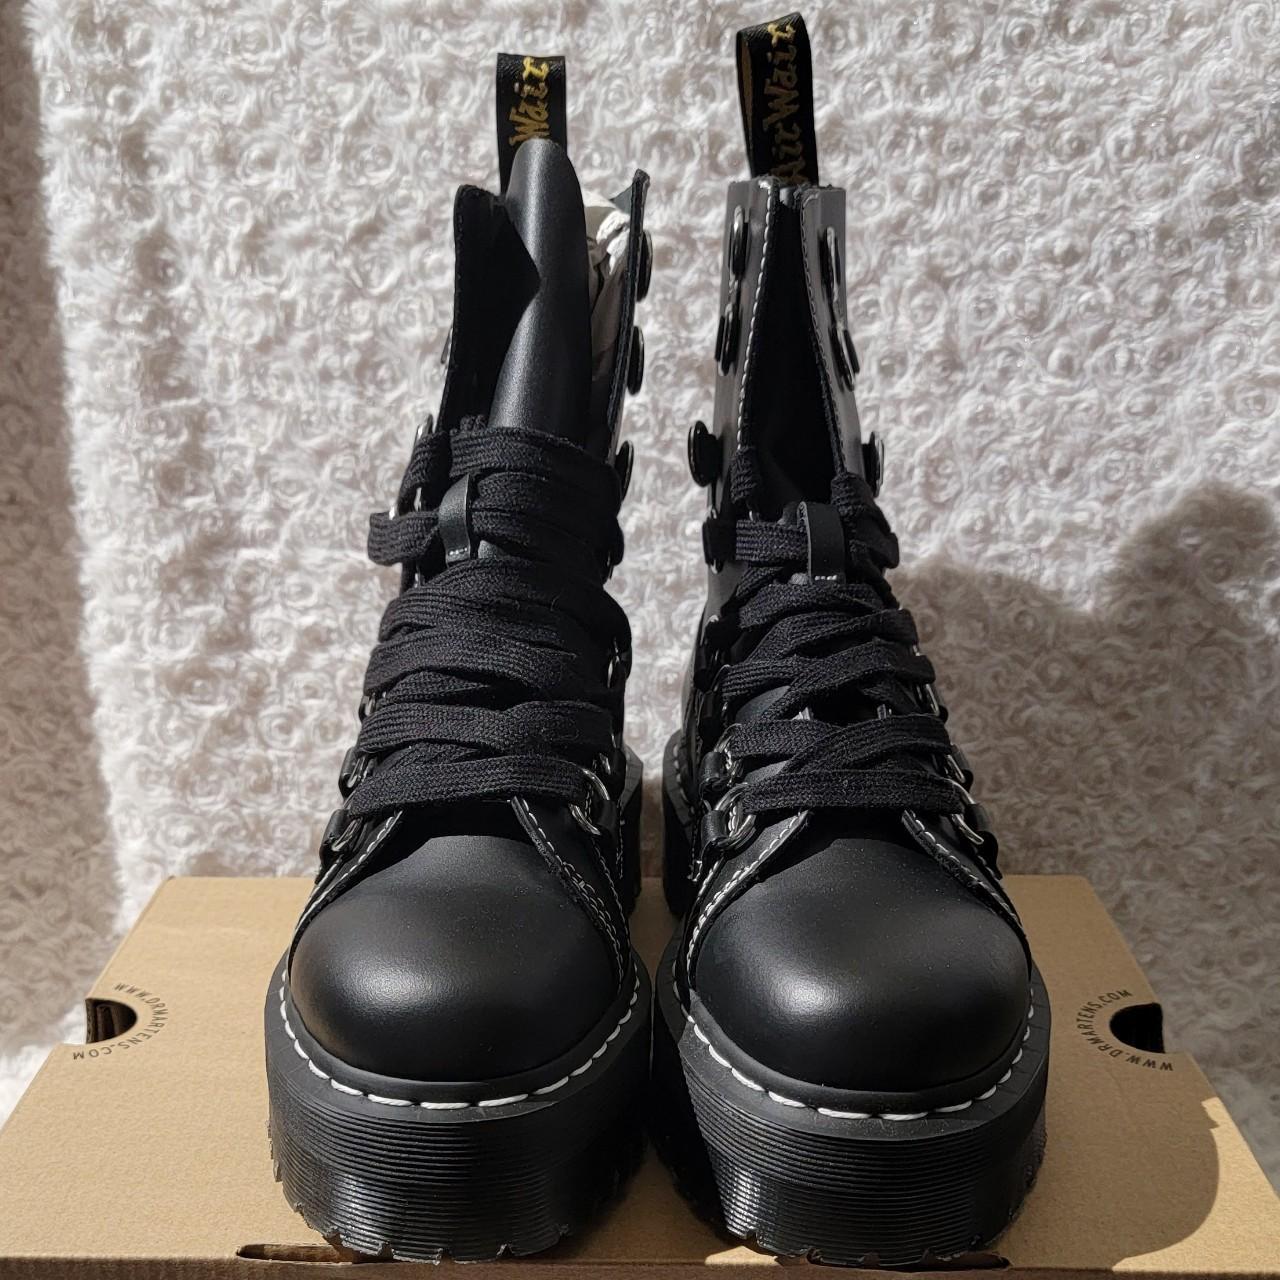 Dr. Martens Women's Black and White Boots | Depop